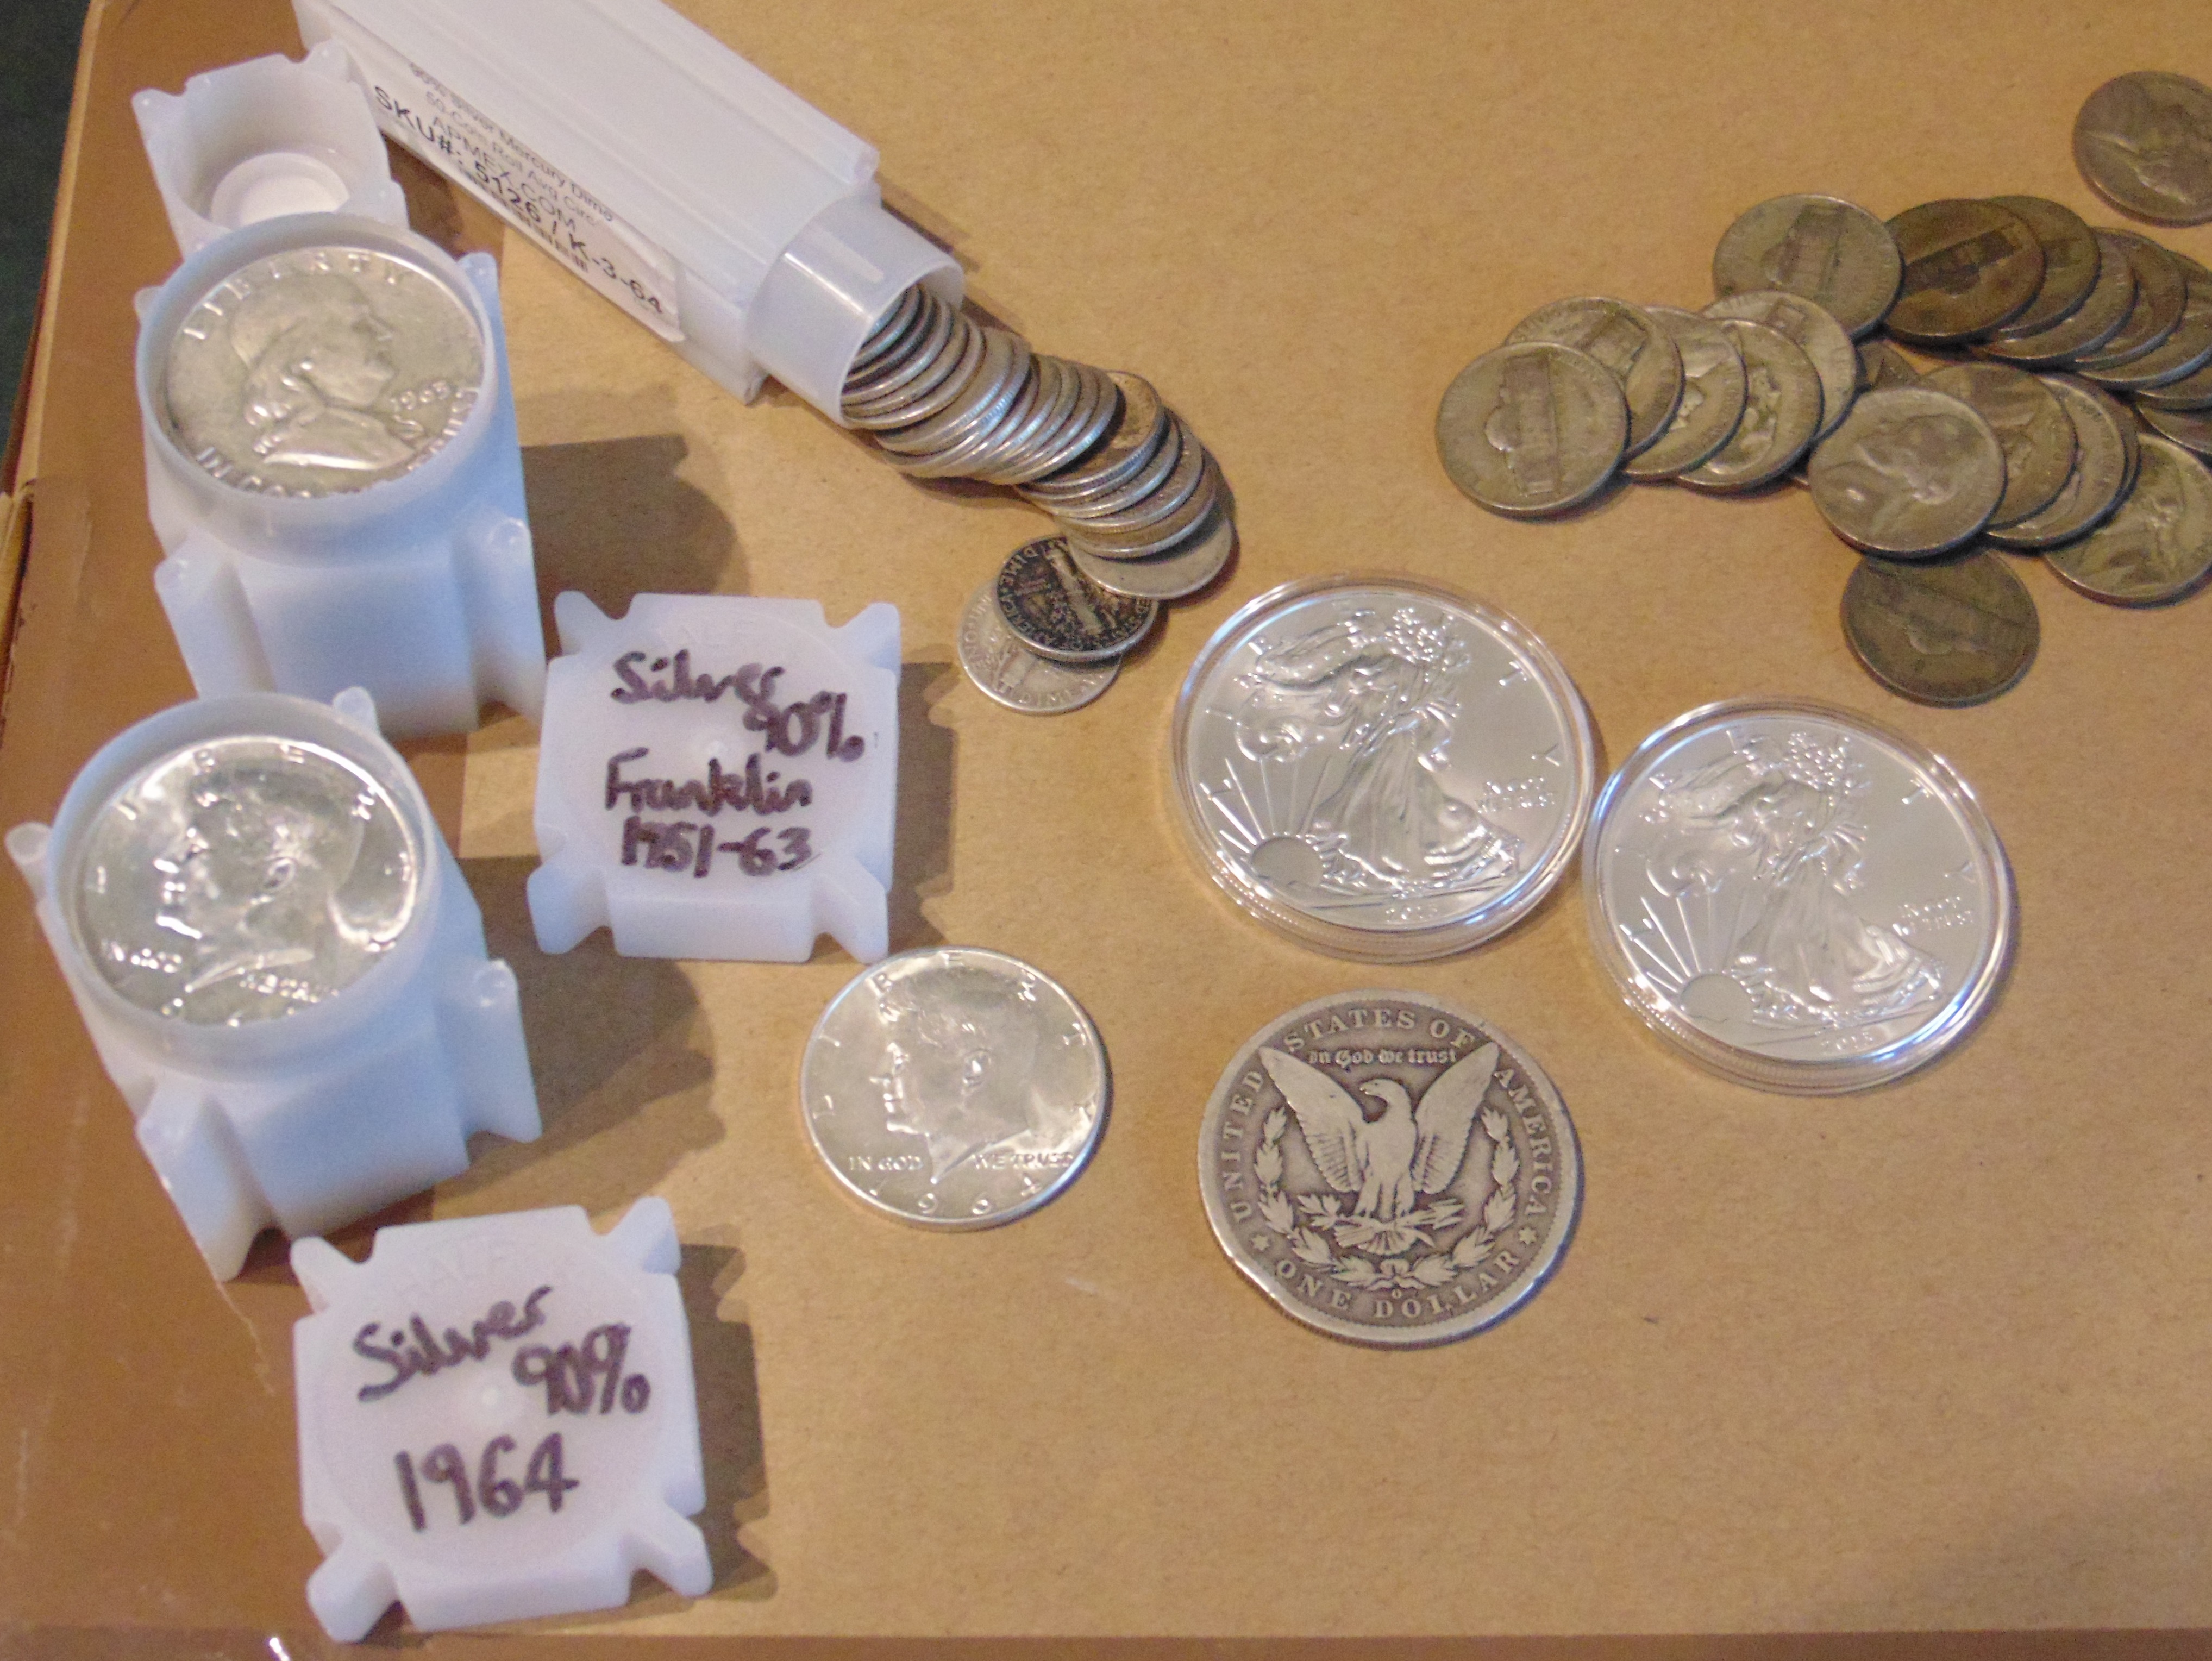 Silver coins or stacks of silver bars.